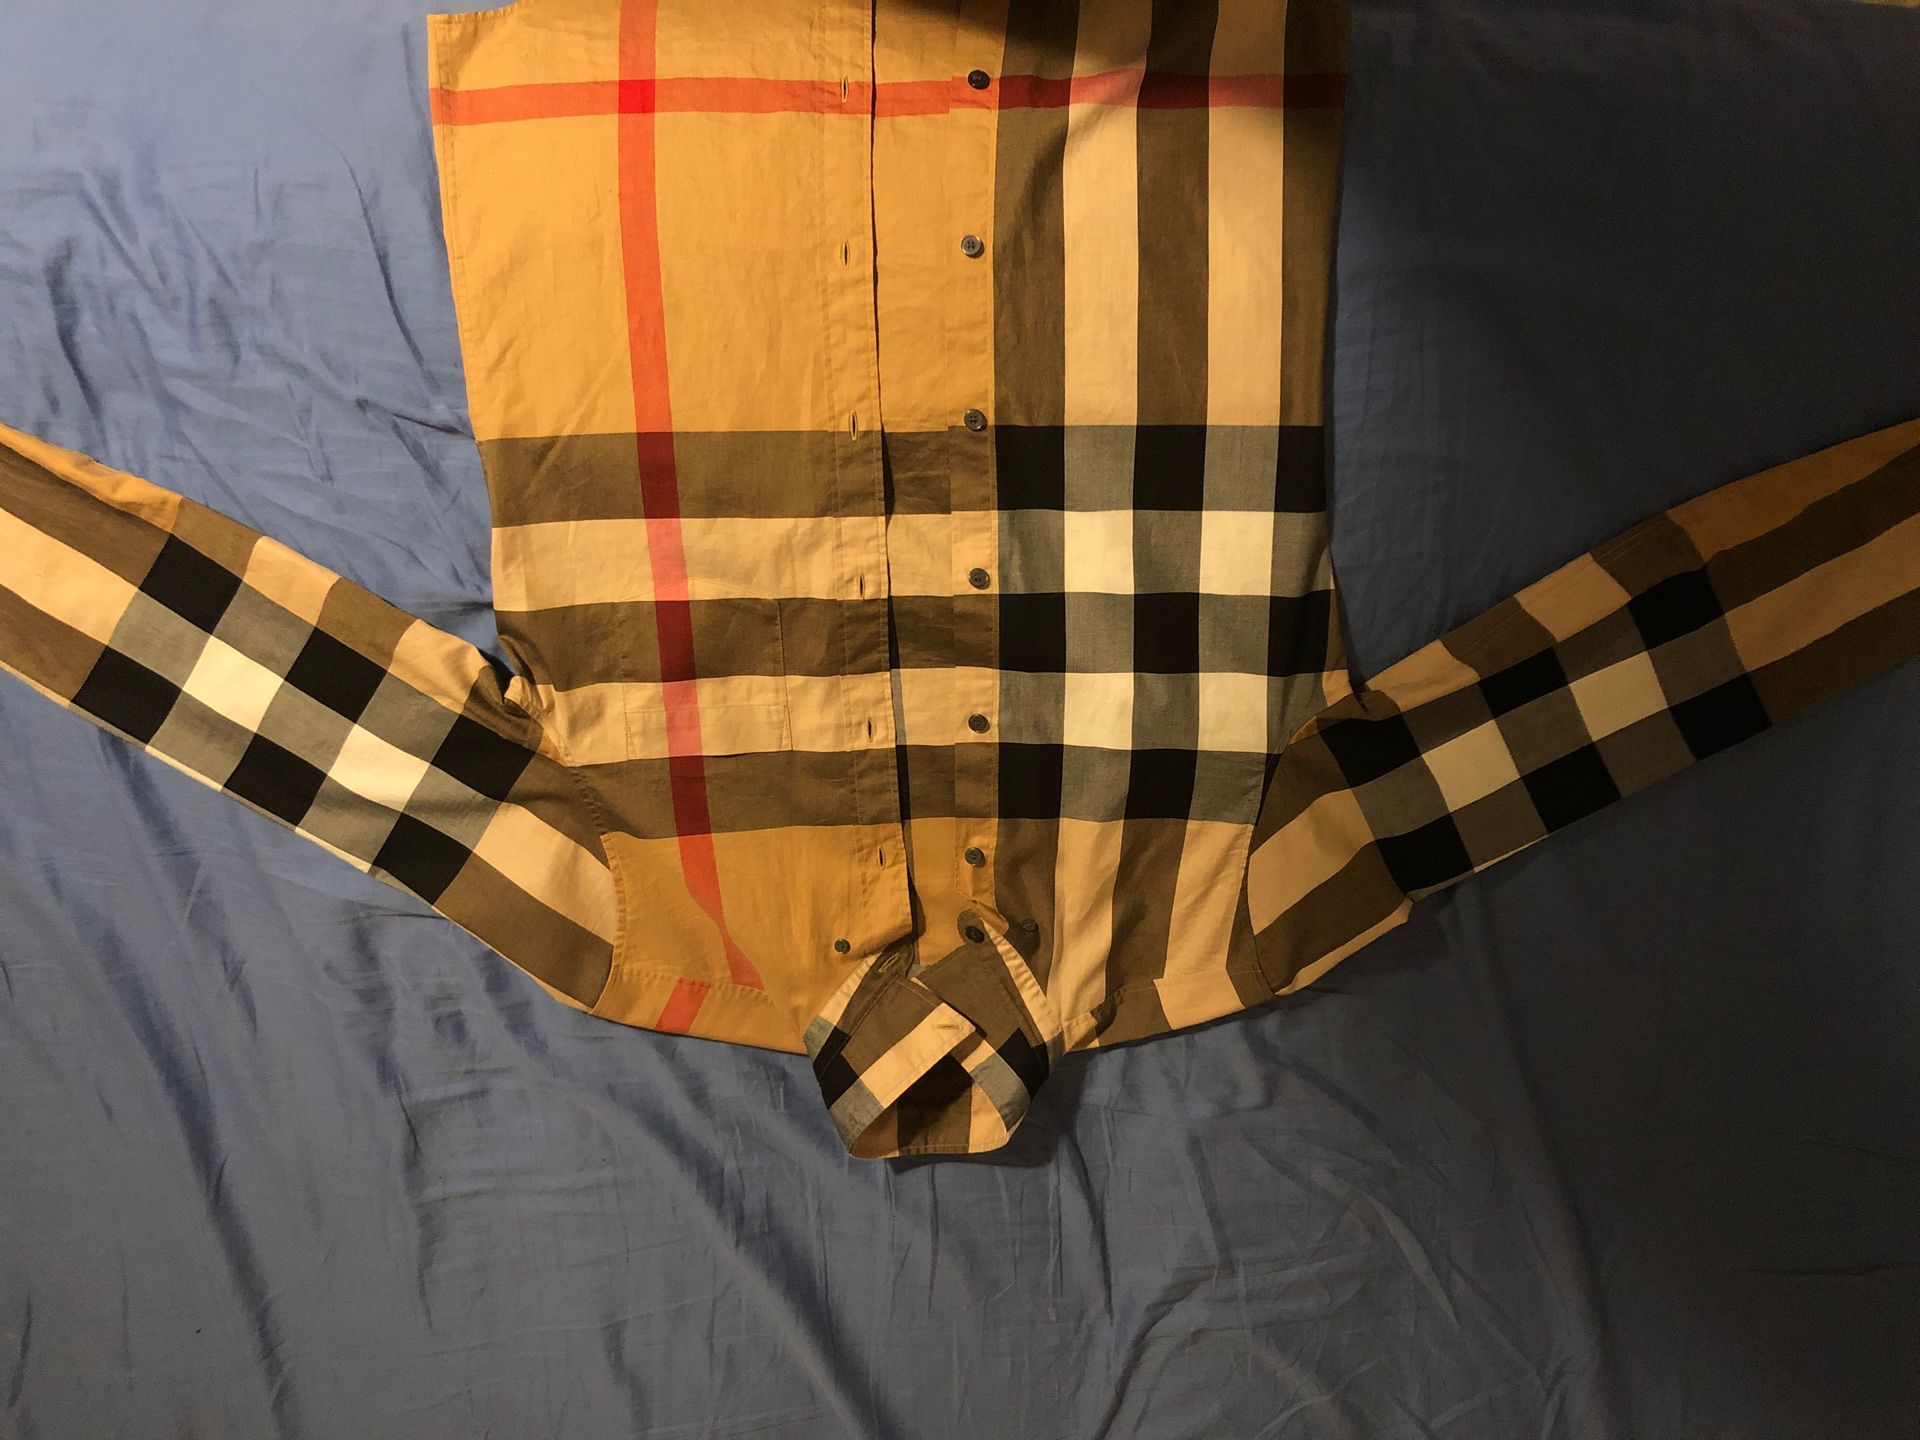 Burberry Flannel